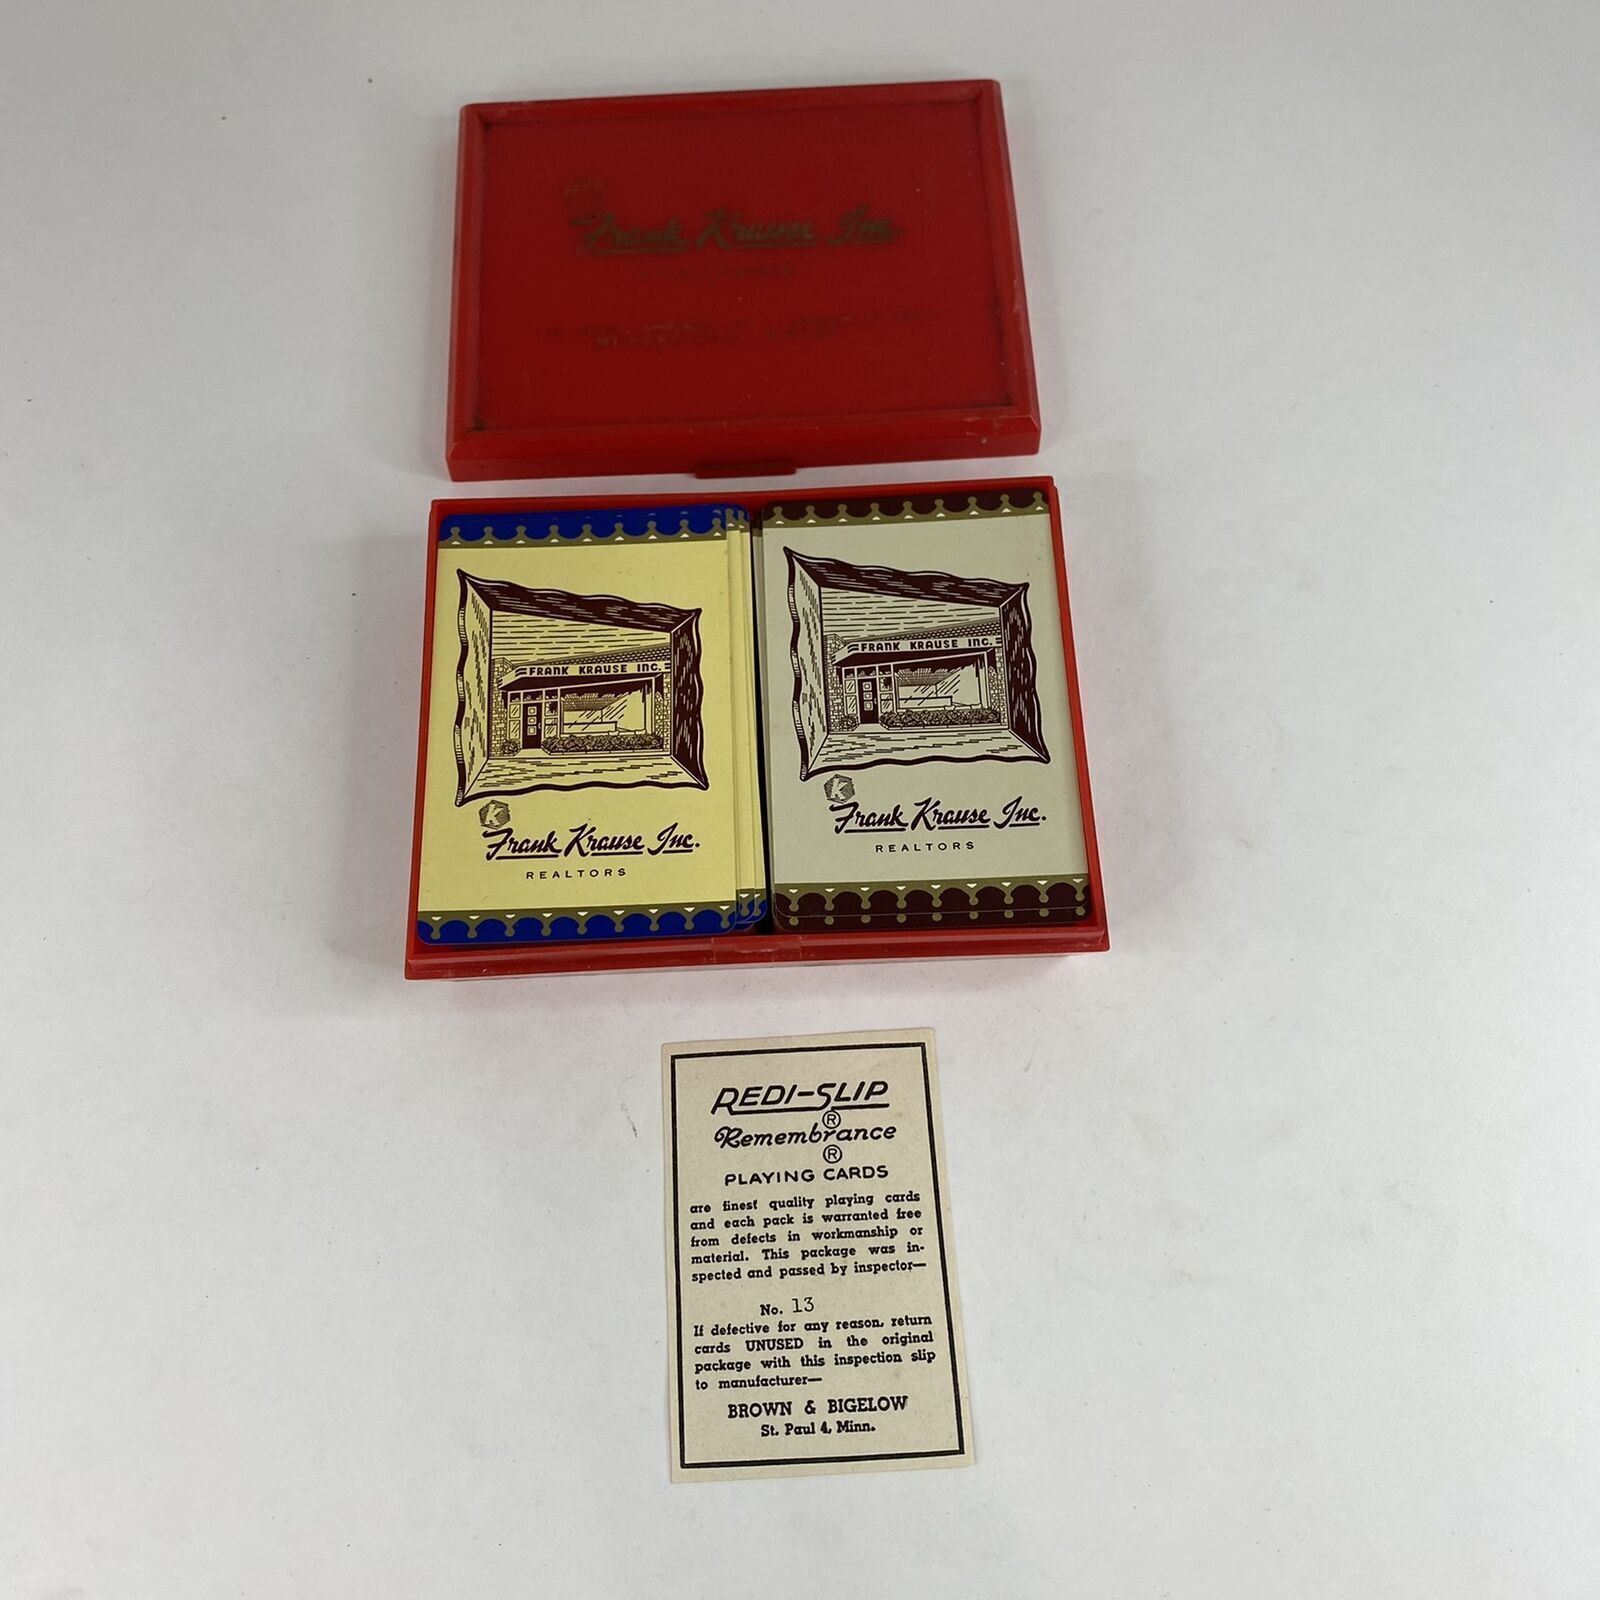 VTG Redi-Slip Remembrance Playing Cards in a Box